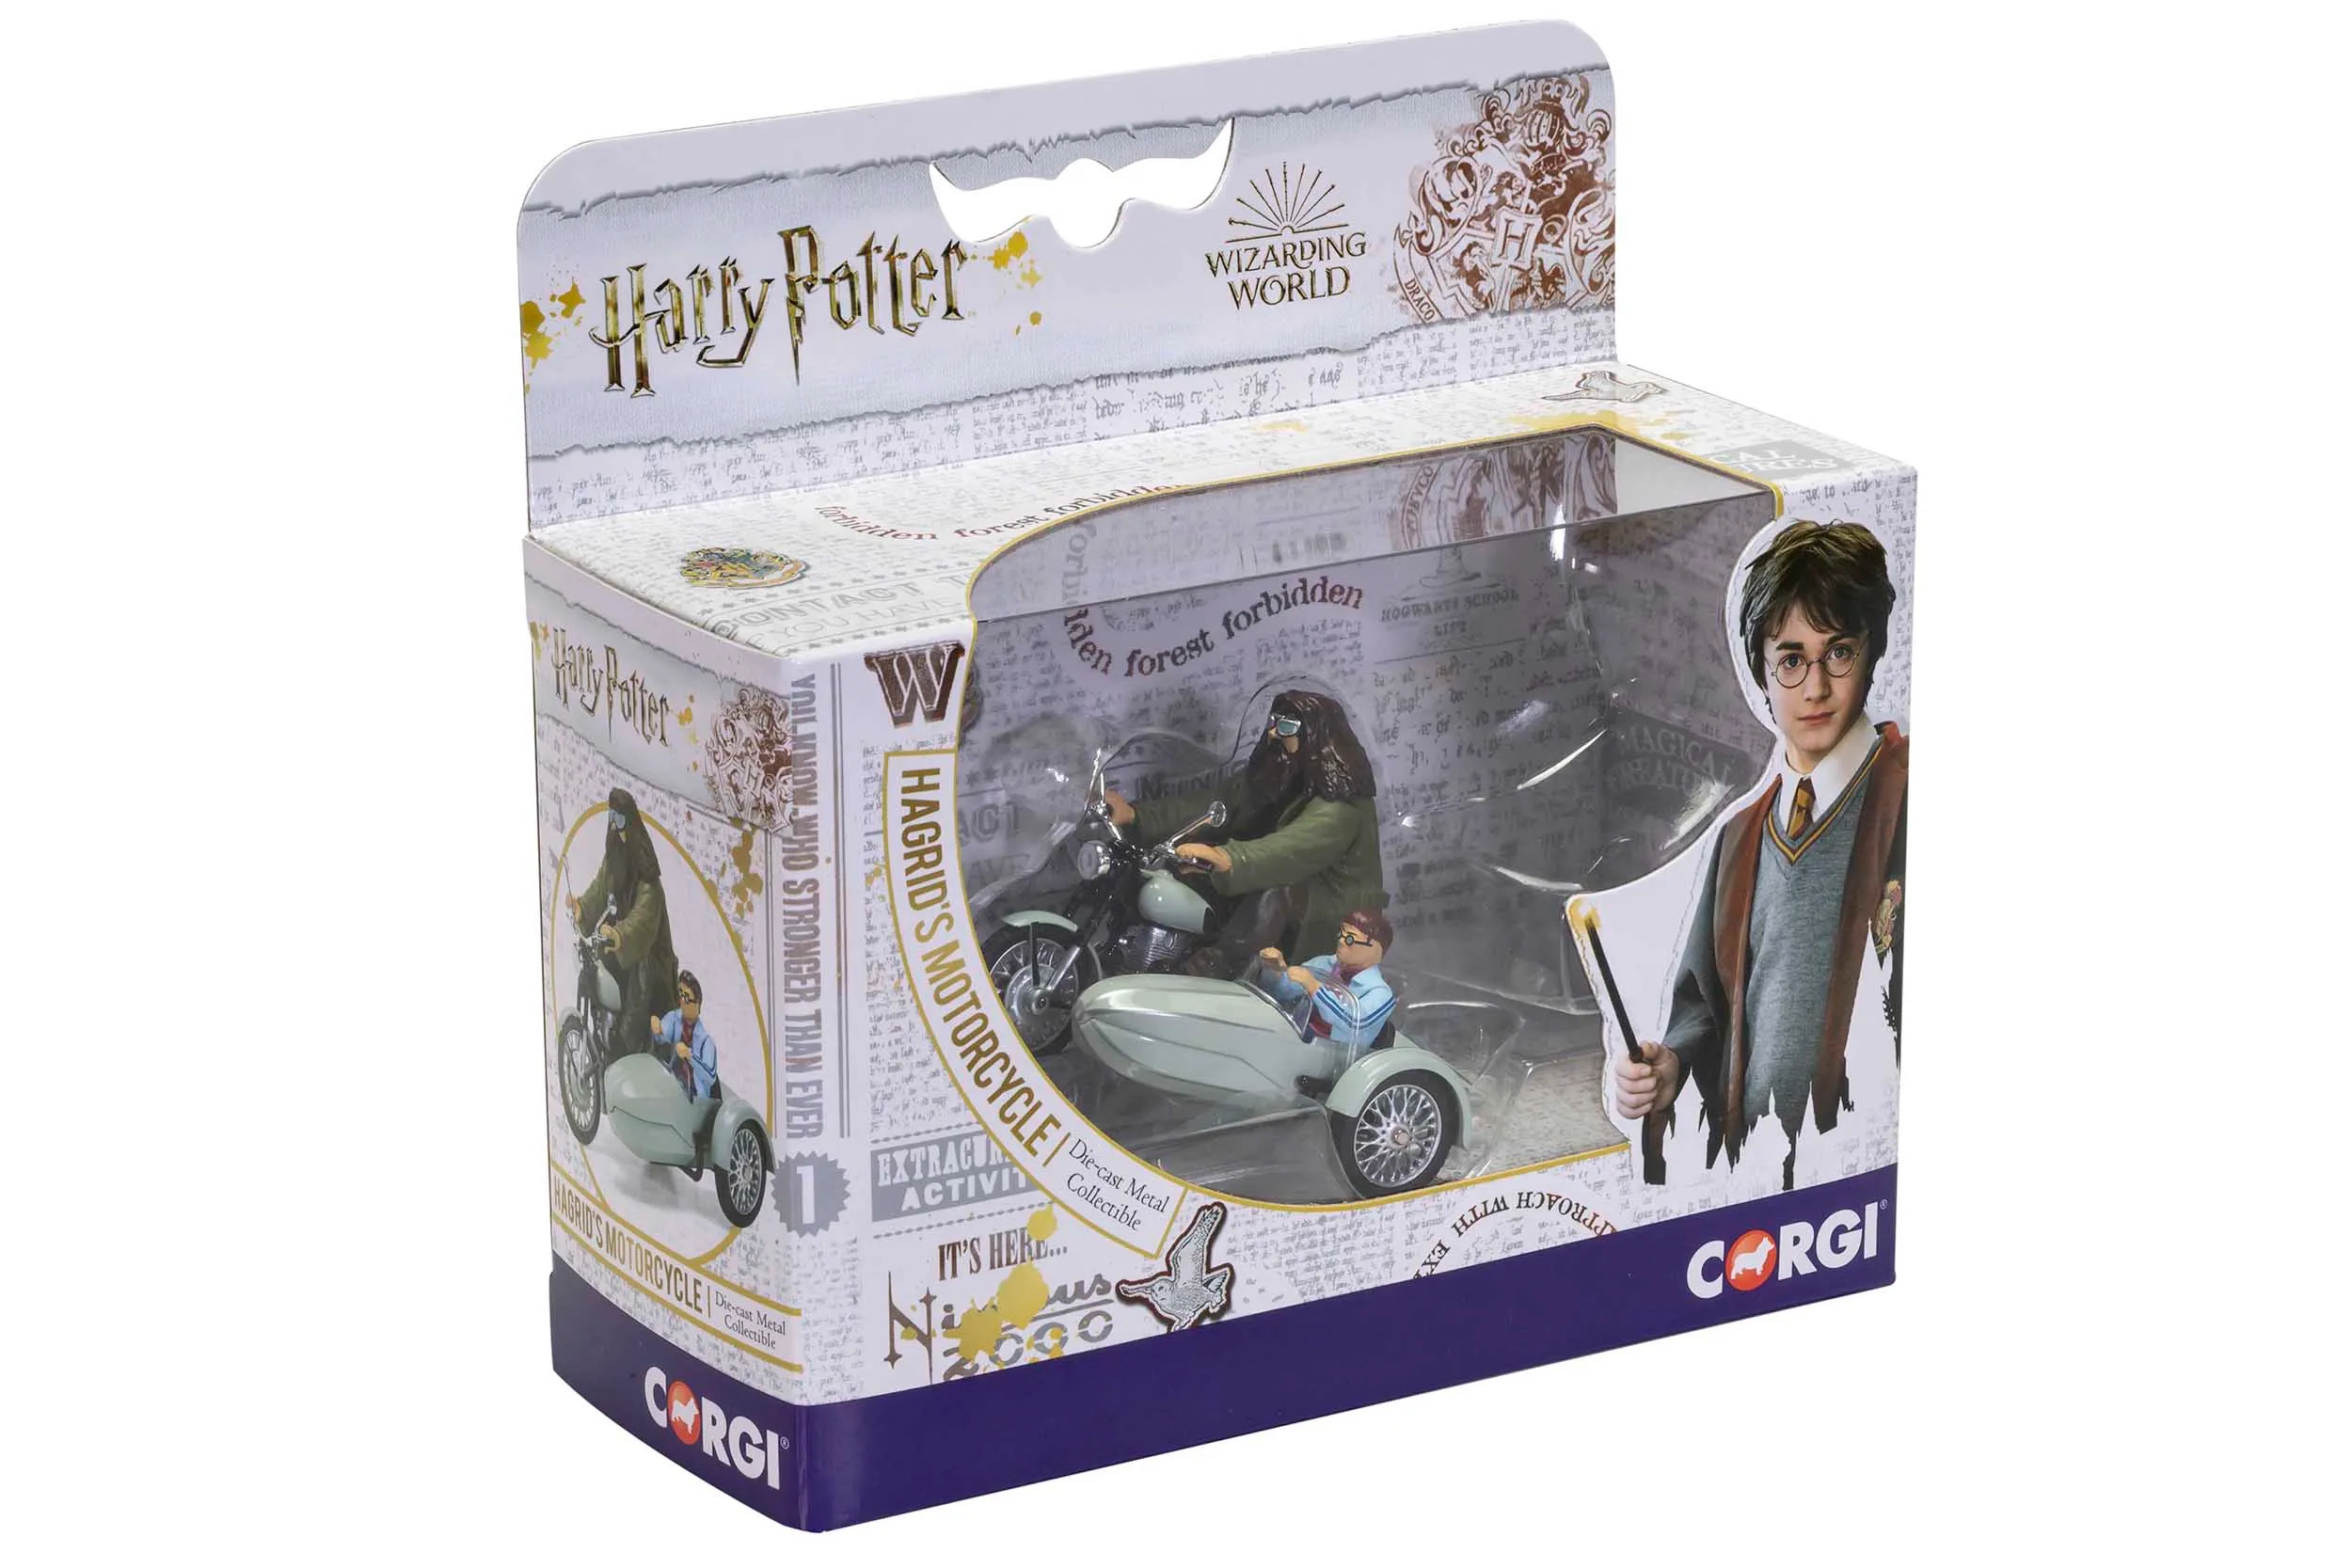 Harry Potter Hagrid Motorcycle and Sidecar